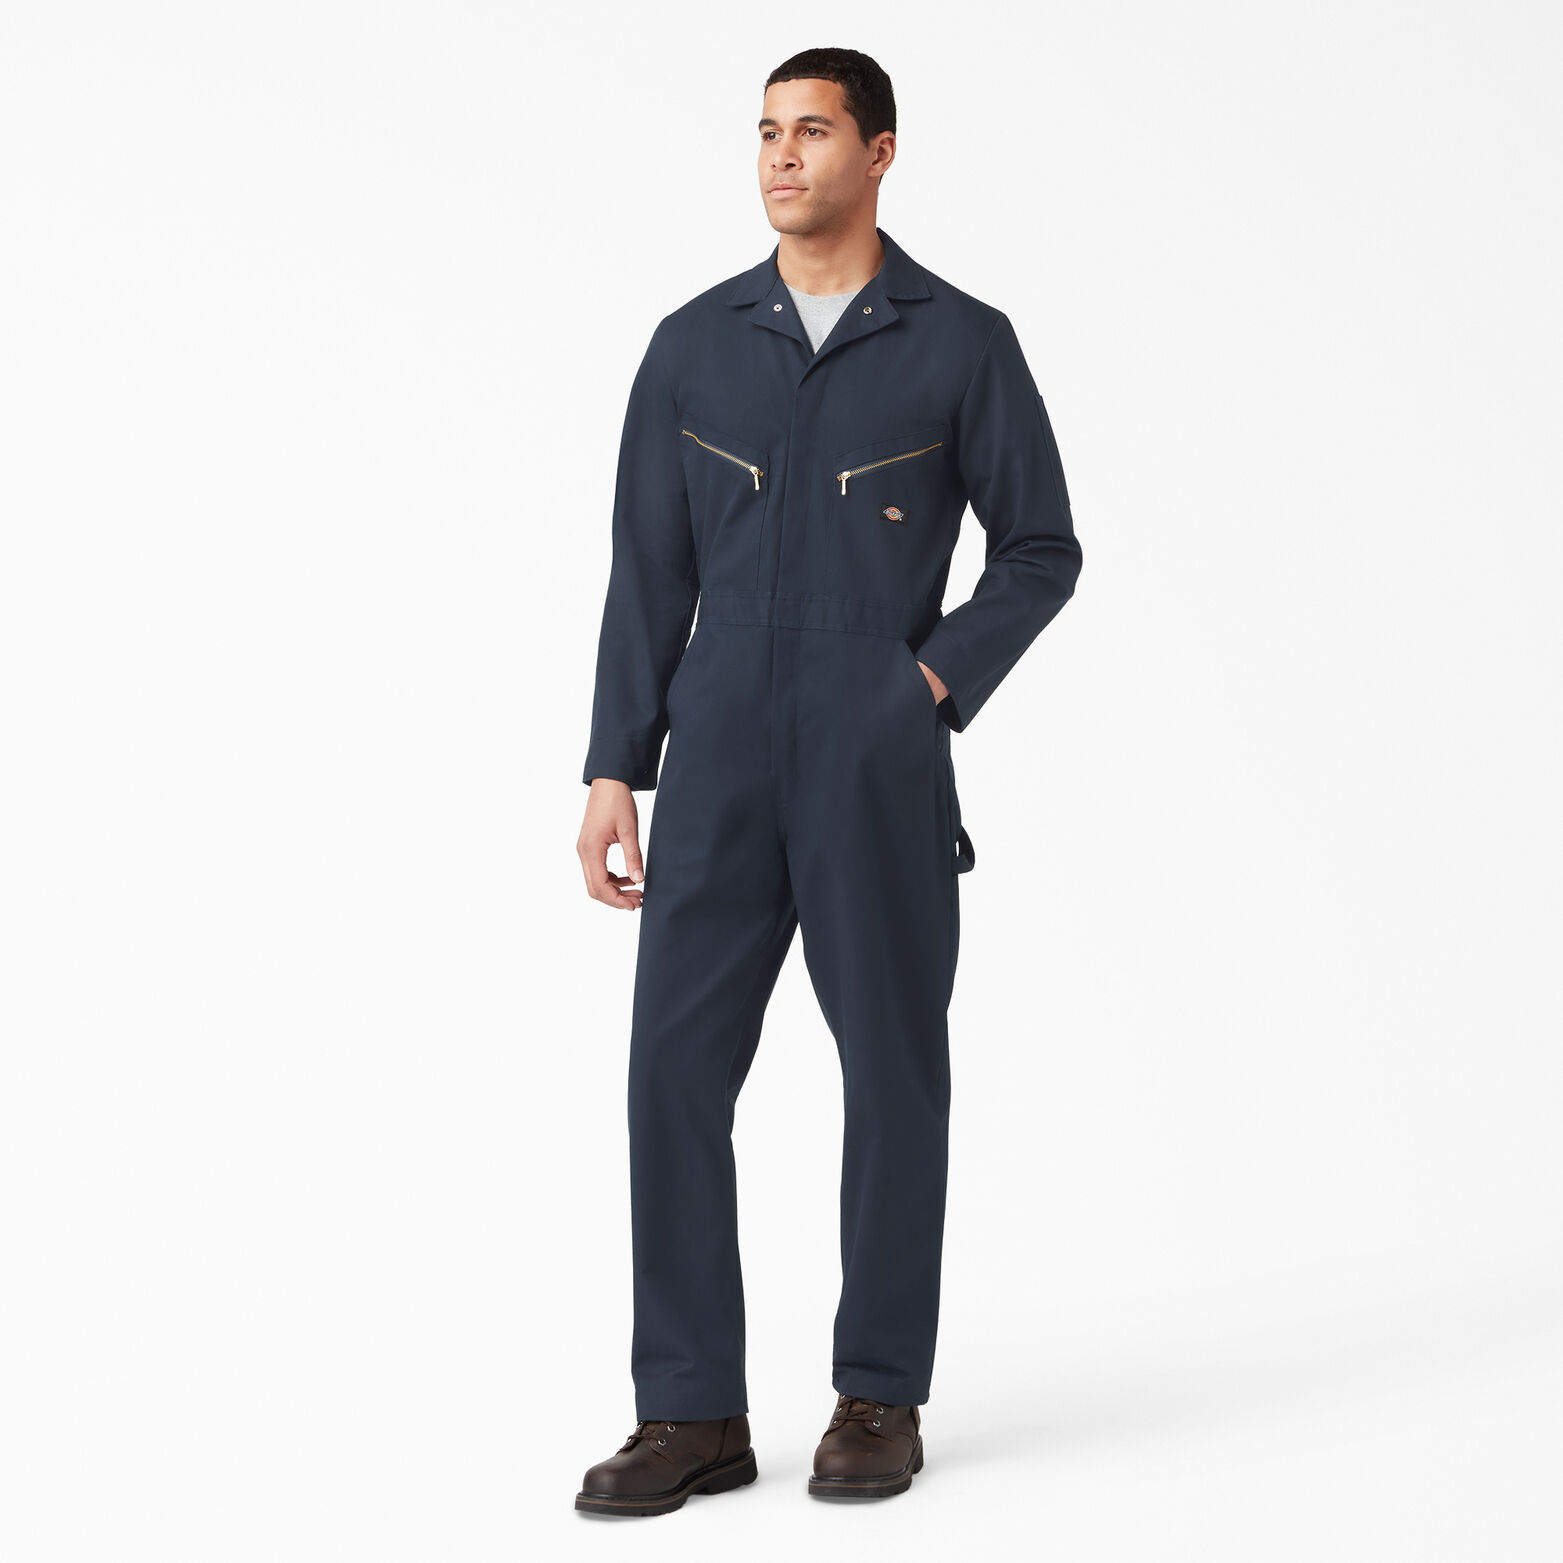 XL Cotton Long Sleeve Coveralls Navy 